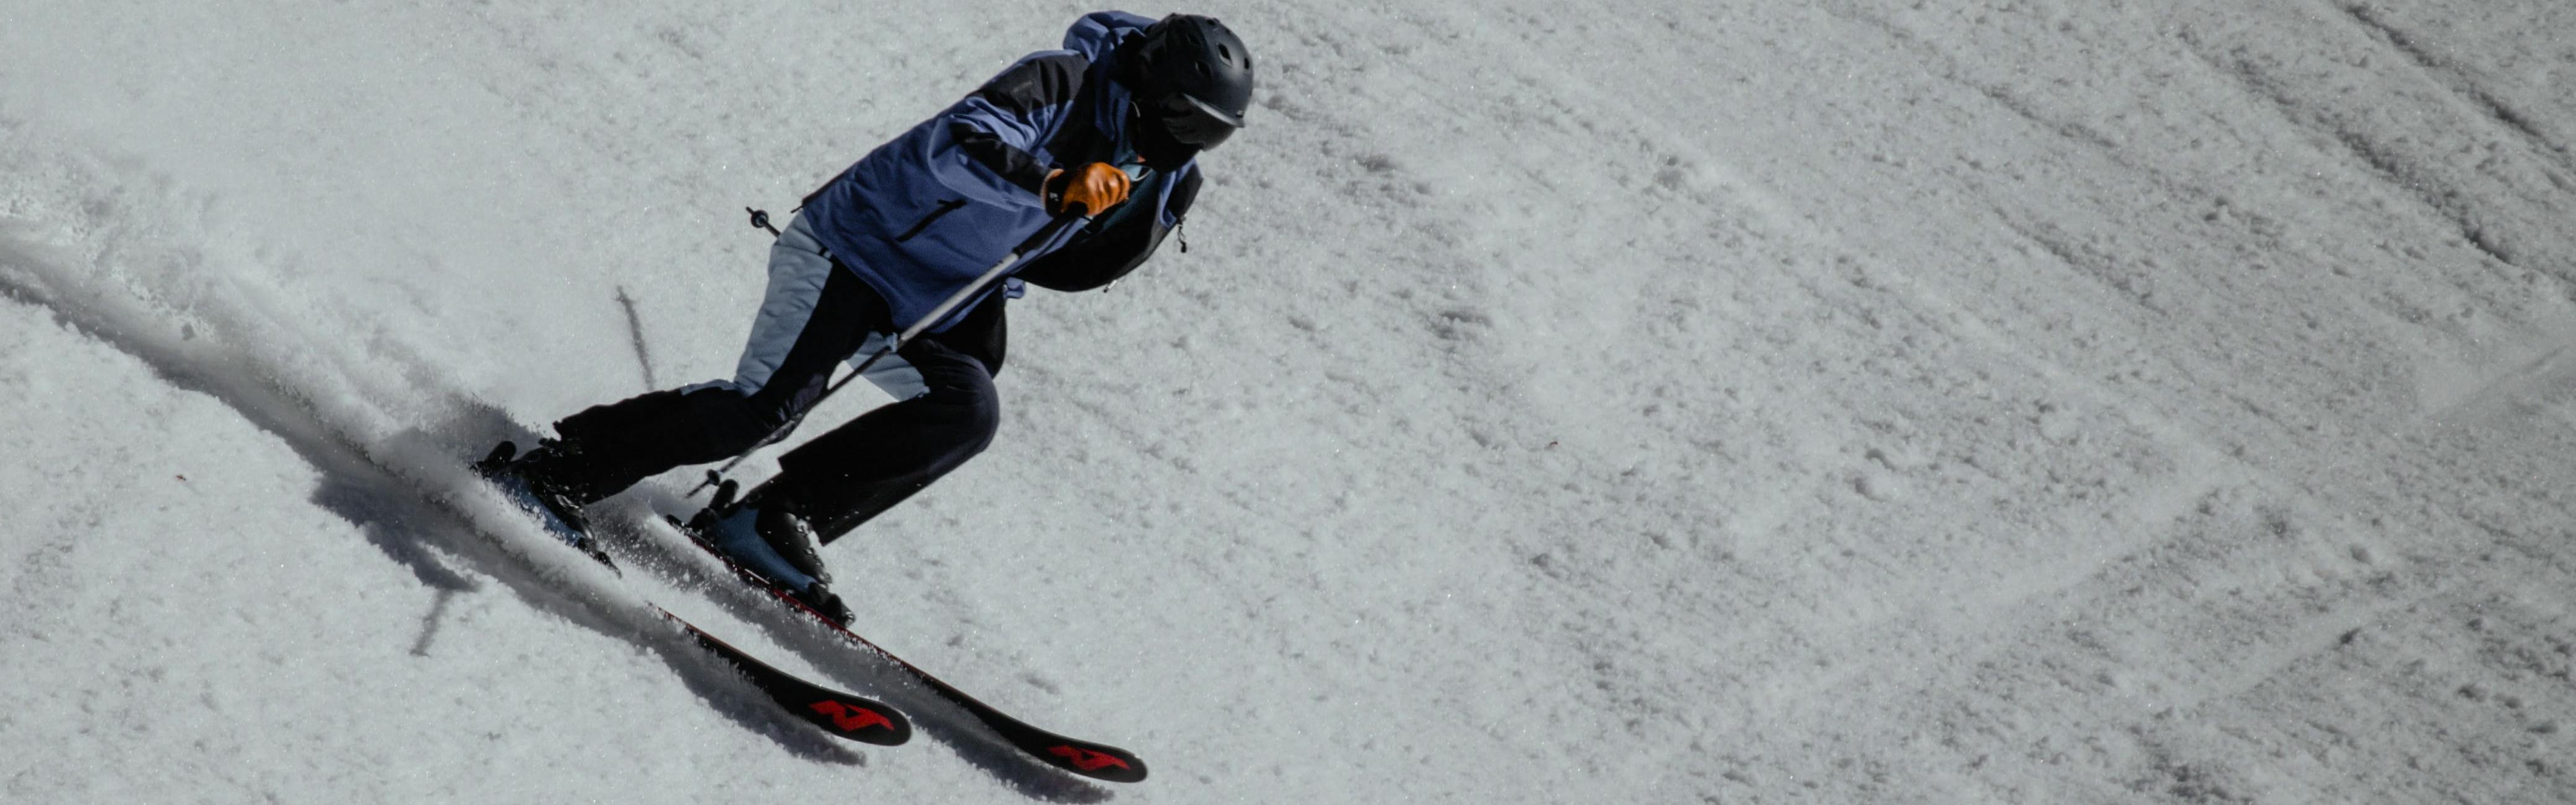 A skier turns down a snowy slope with his Nordica Skis. 